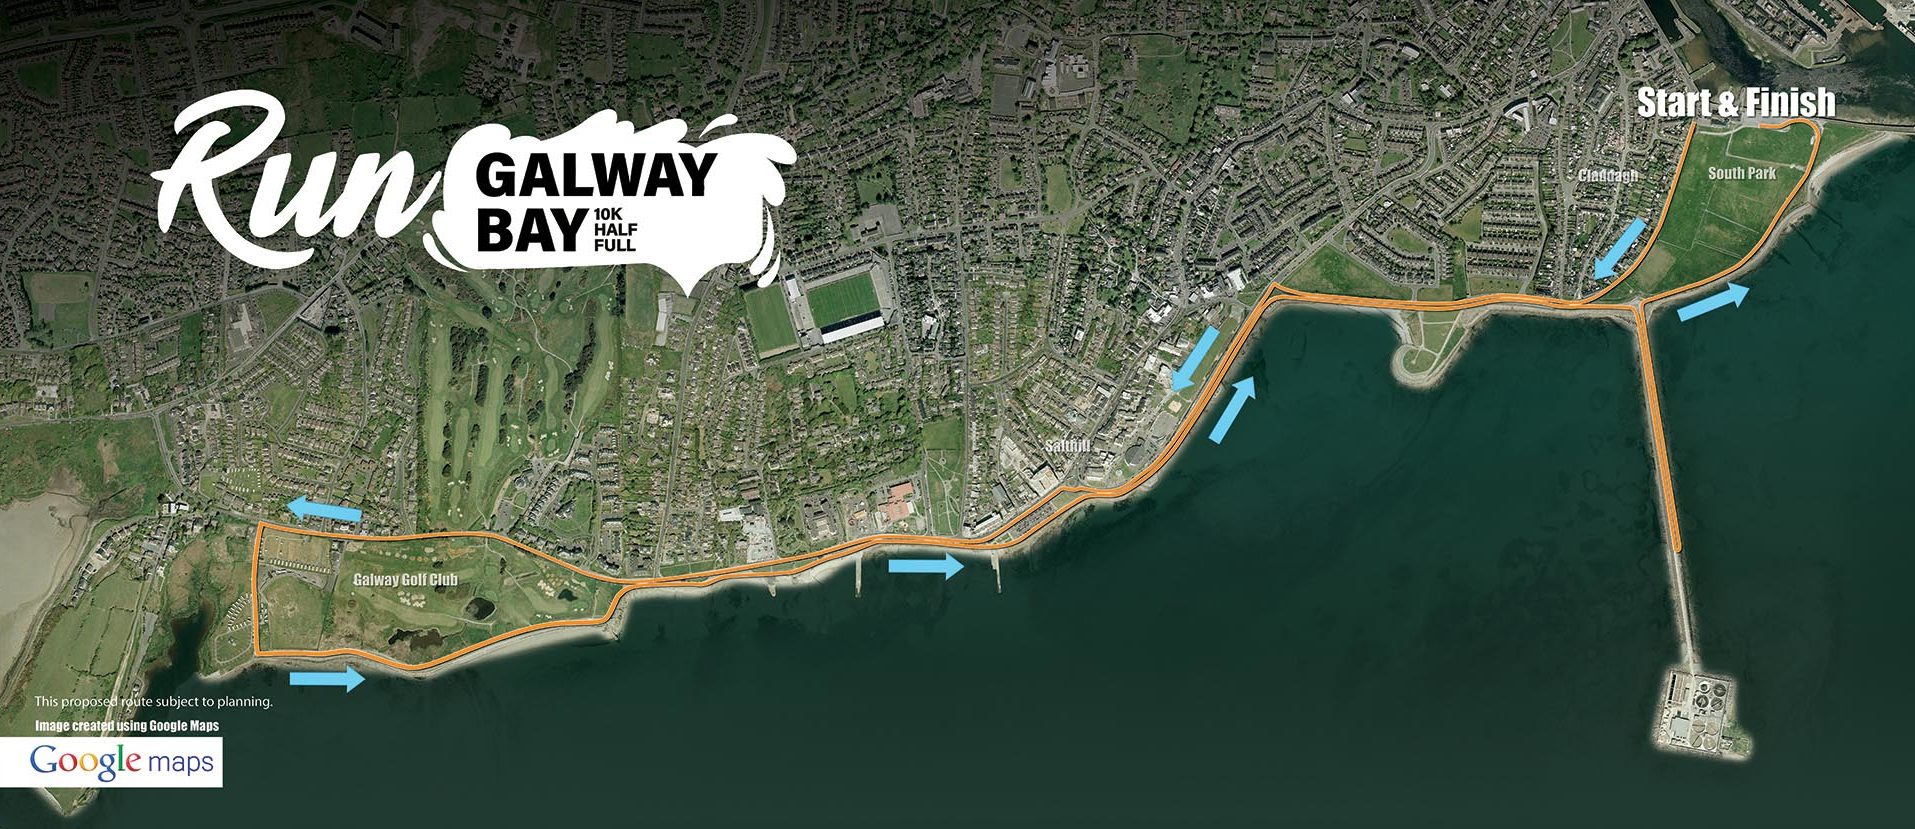 Galway Bay | History, Sunset Times, Things to Do with map